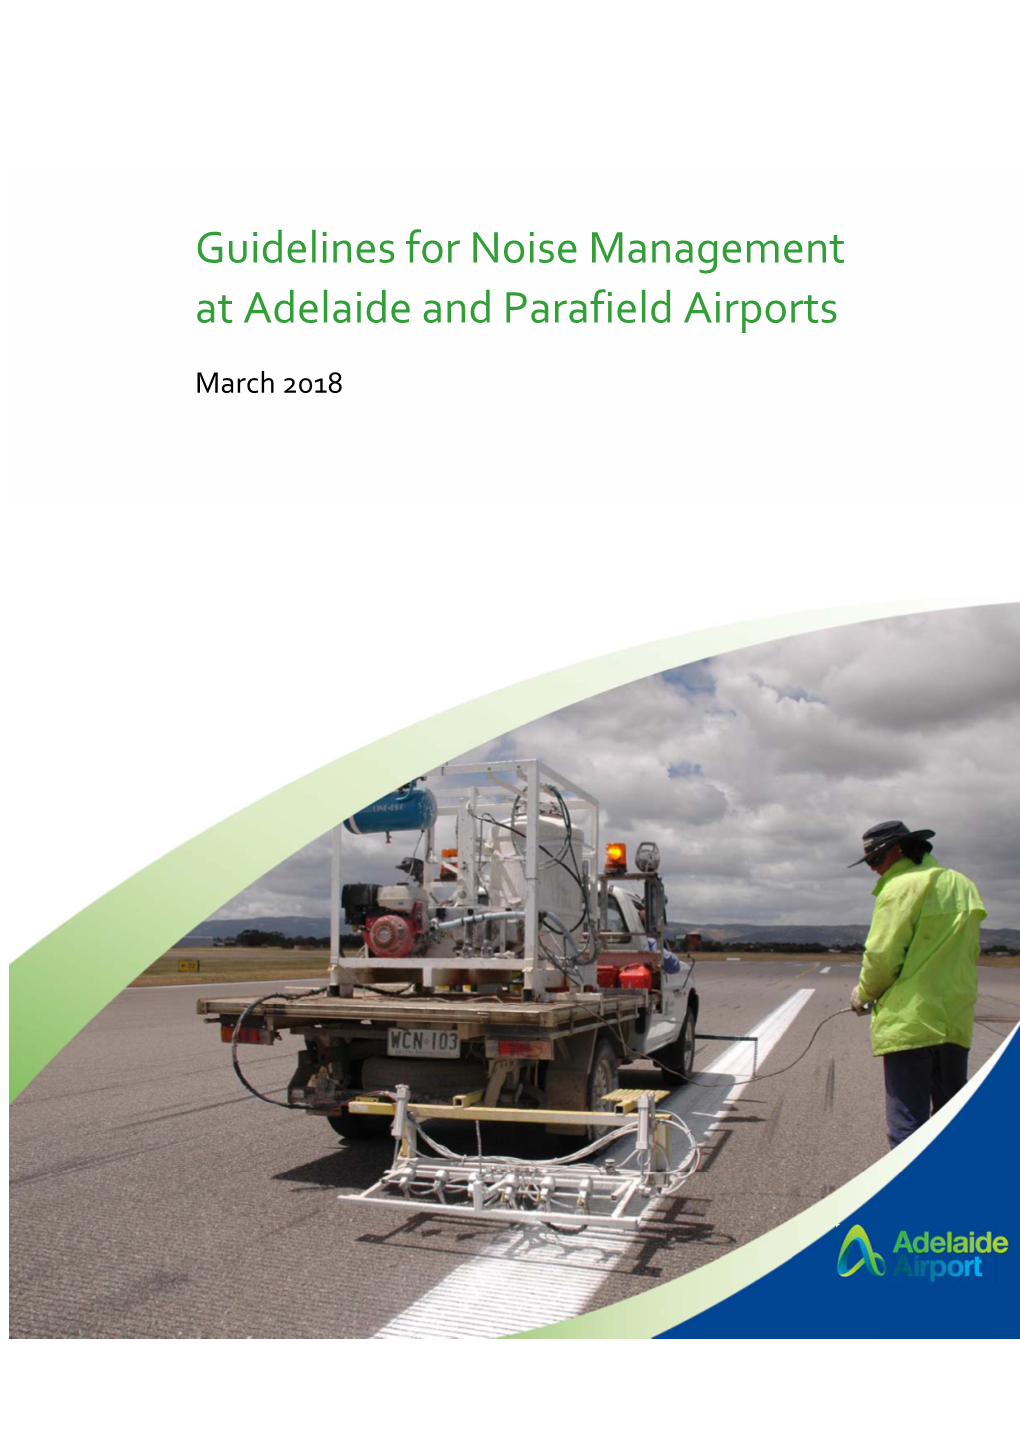 Guidelines for Noise Management at Adelaide and Parafield Airports